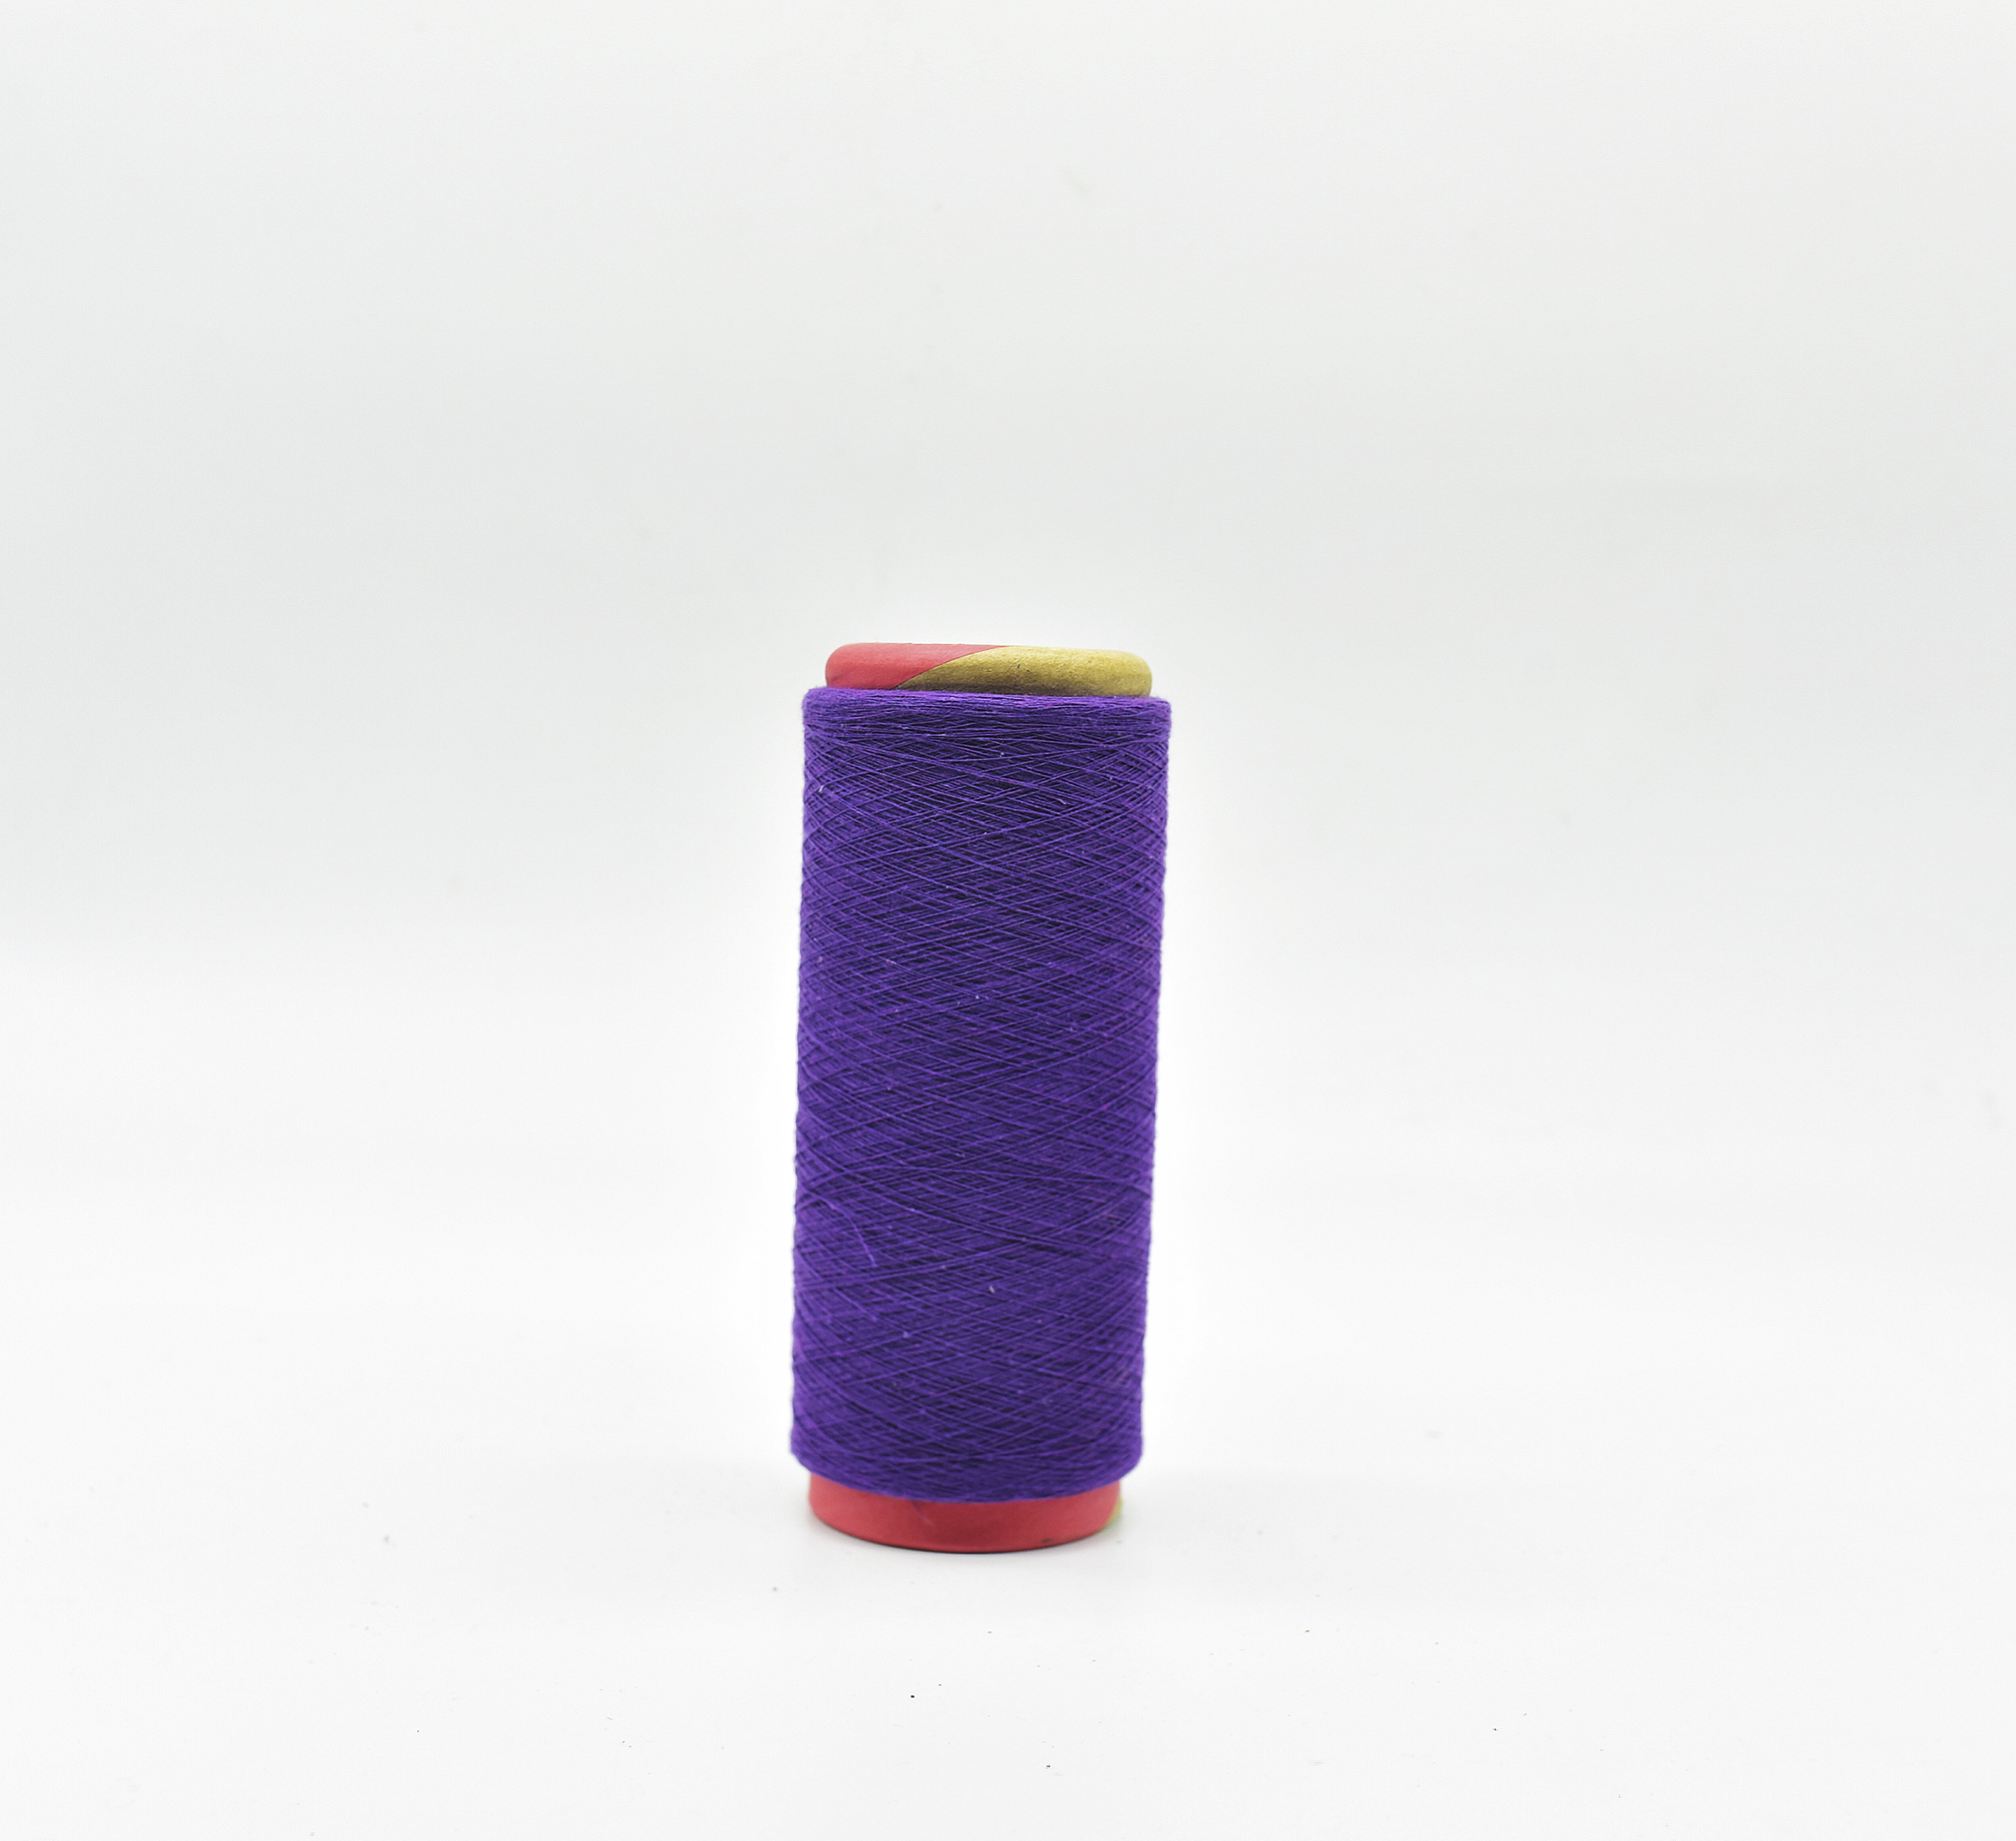 NE 16S Purple colors recycled cotton yarn for knitting socks 